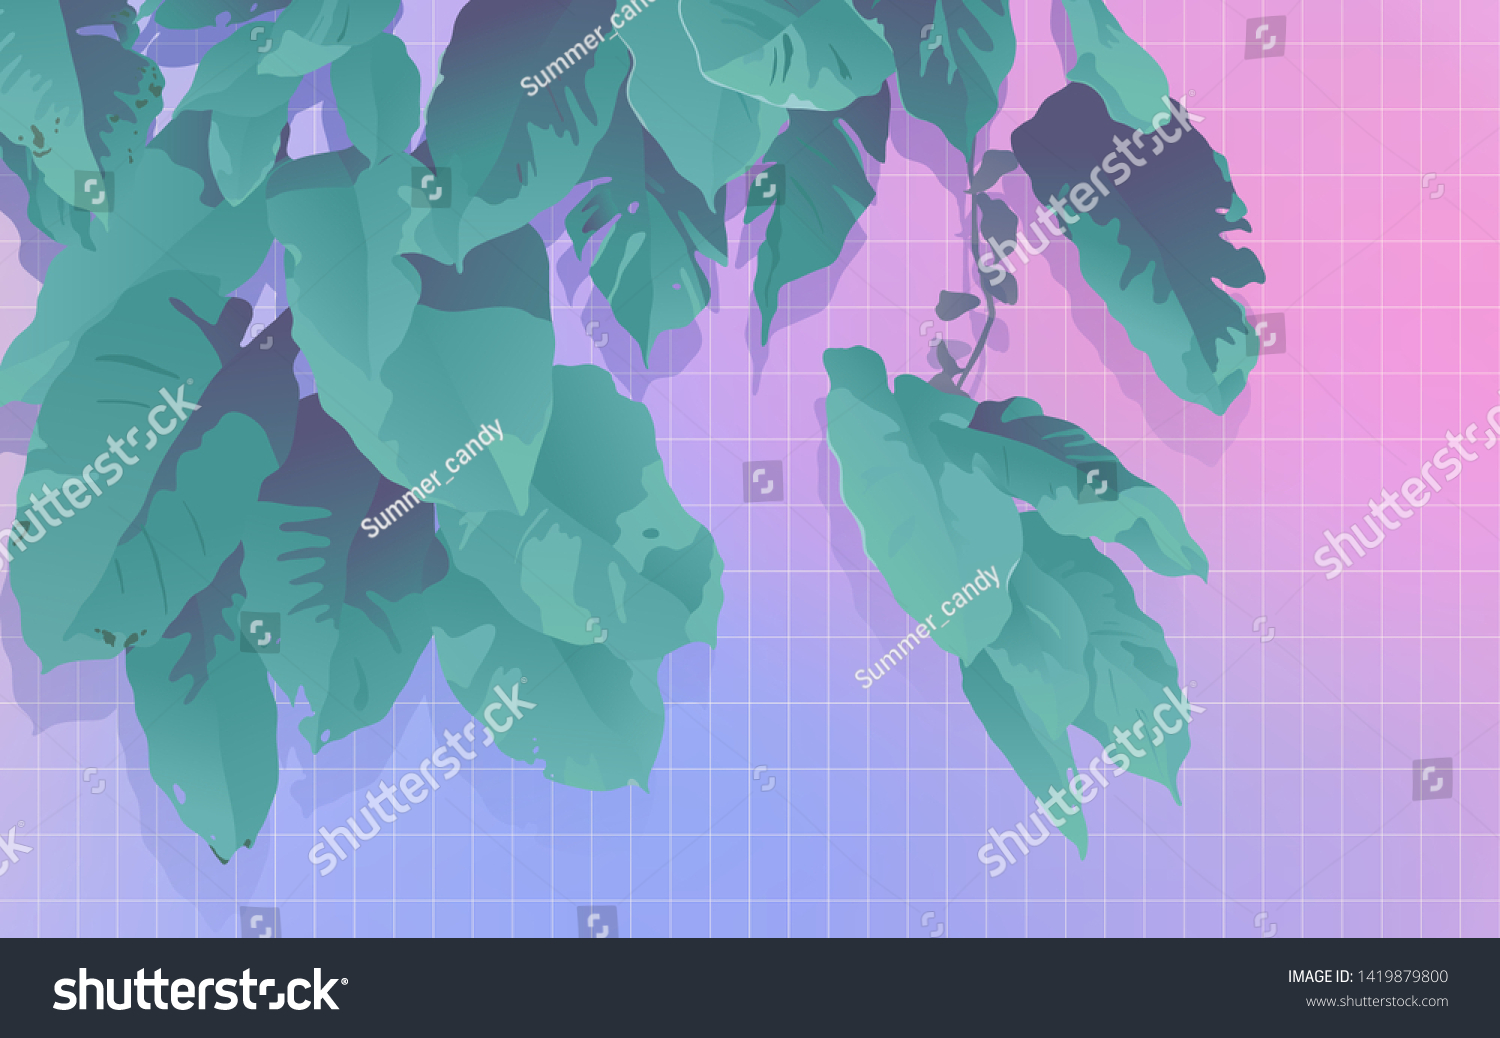 Aesthetic Neon Ambient Room Tropical Palm Stock Vector Royalty